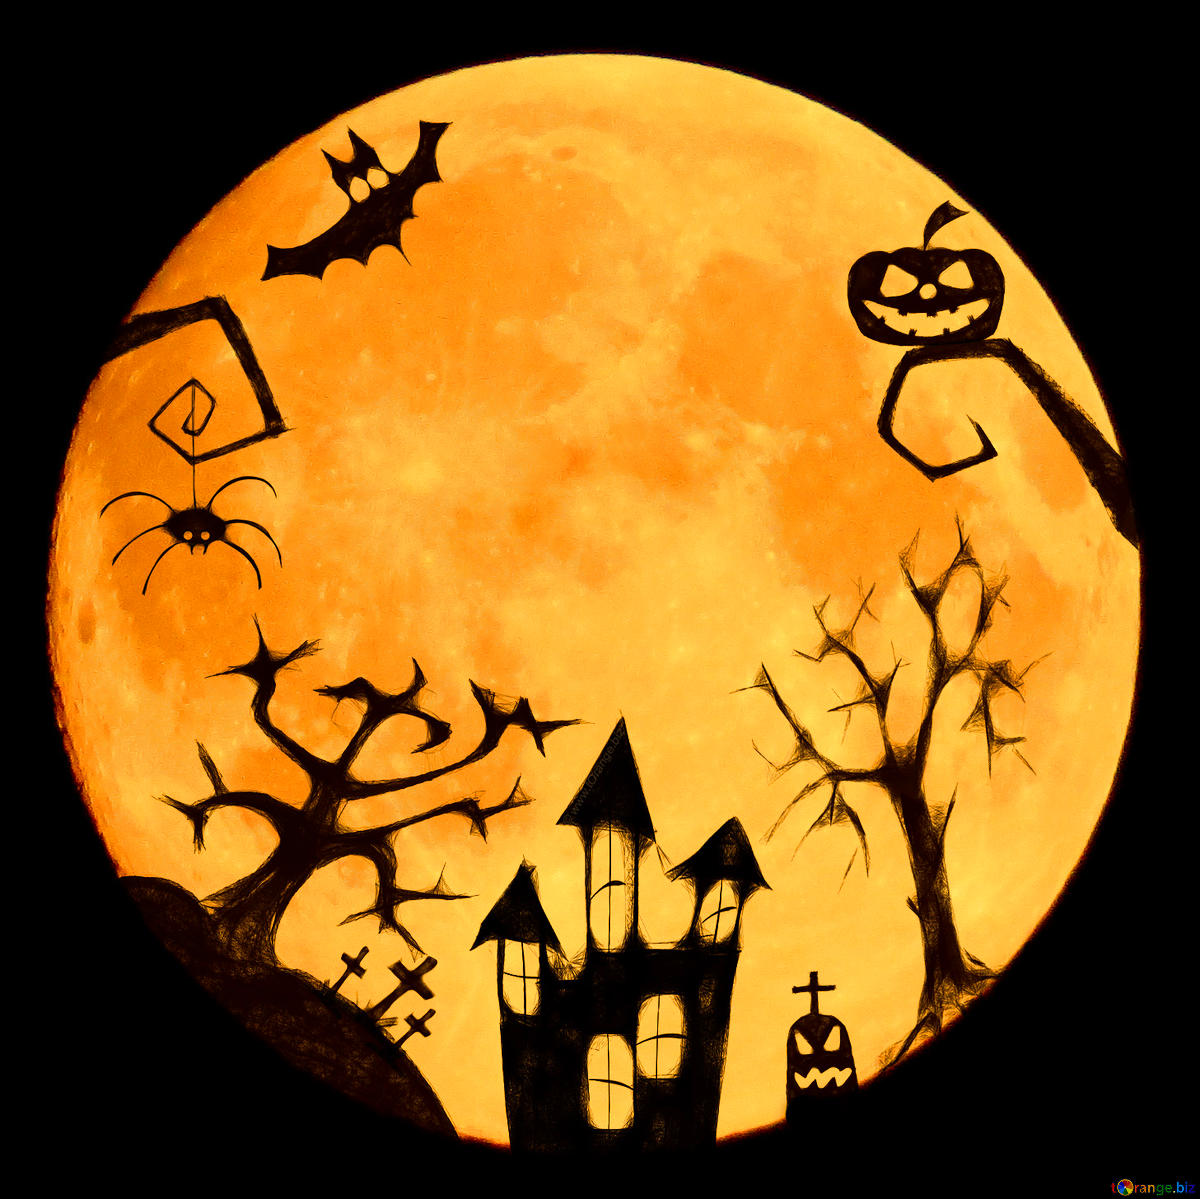 Moon clipart spooky. Download free picture halloween